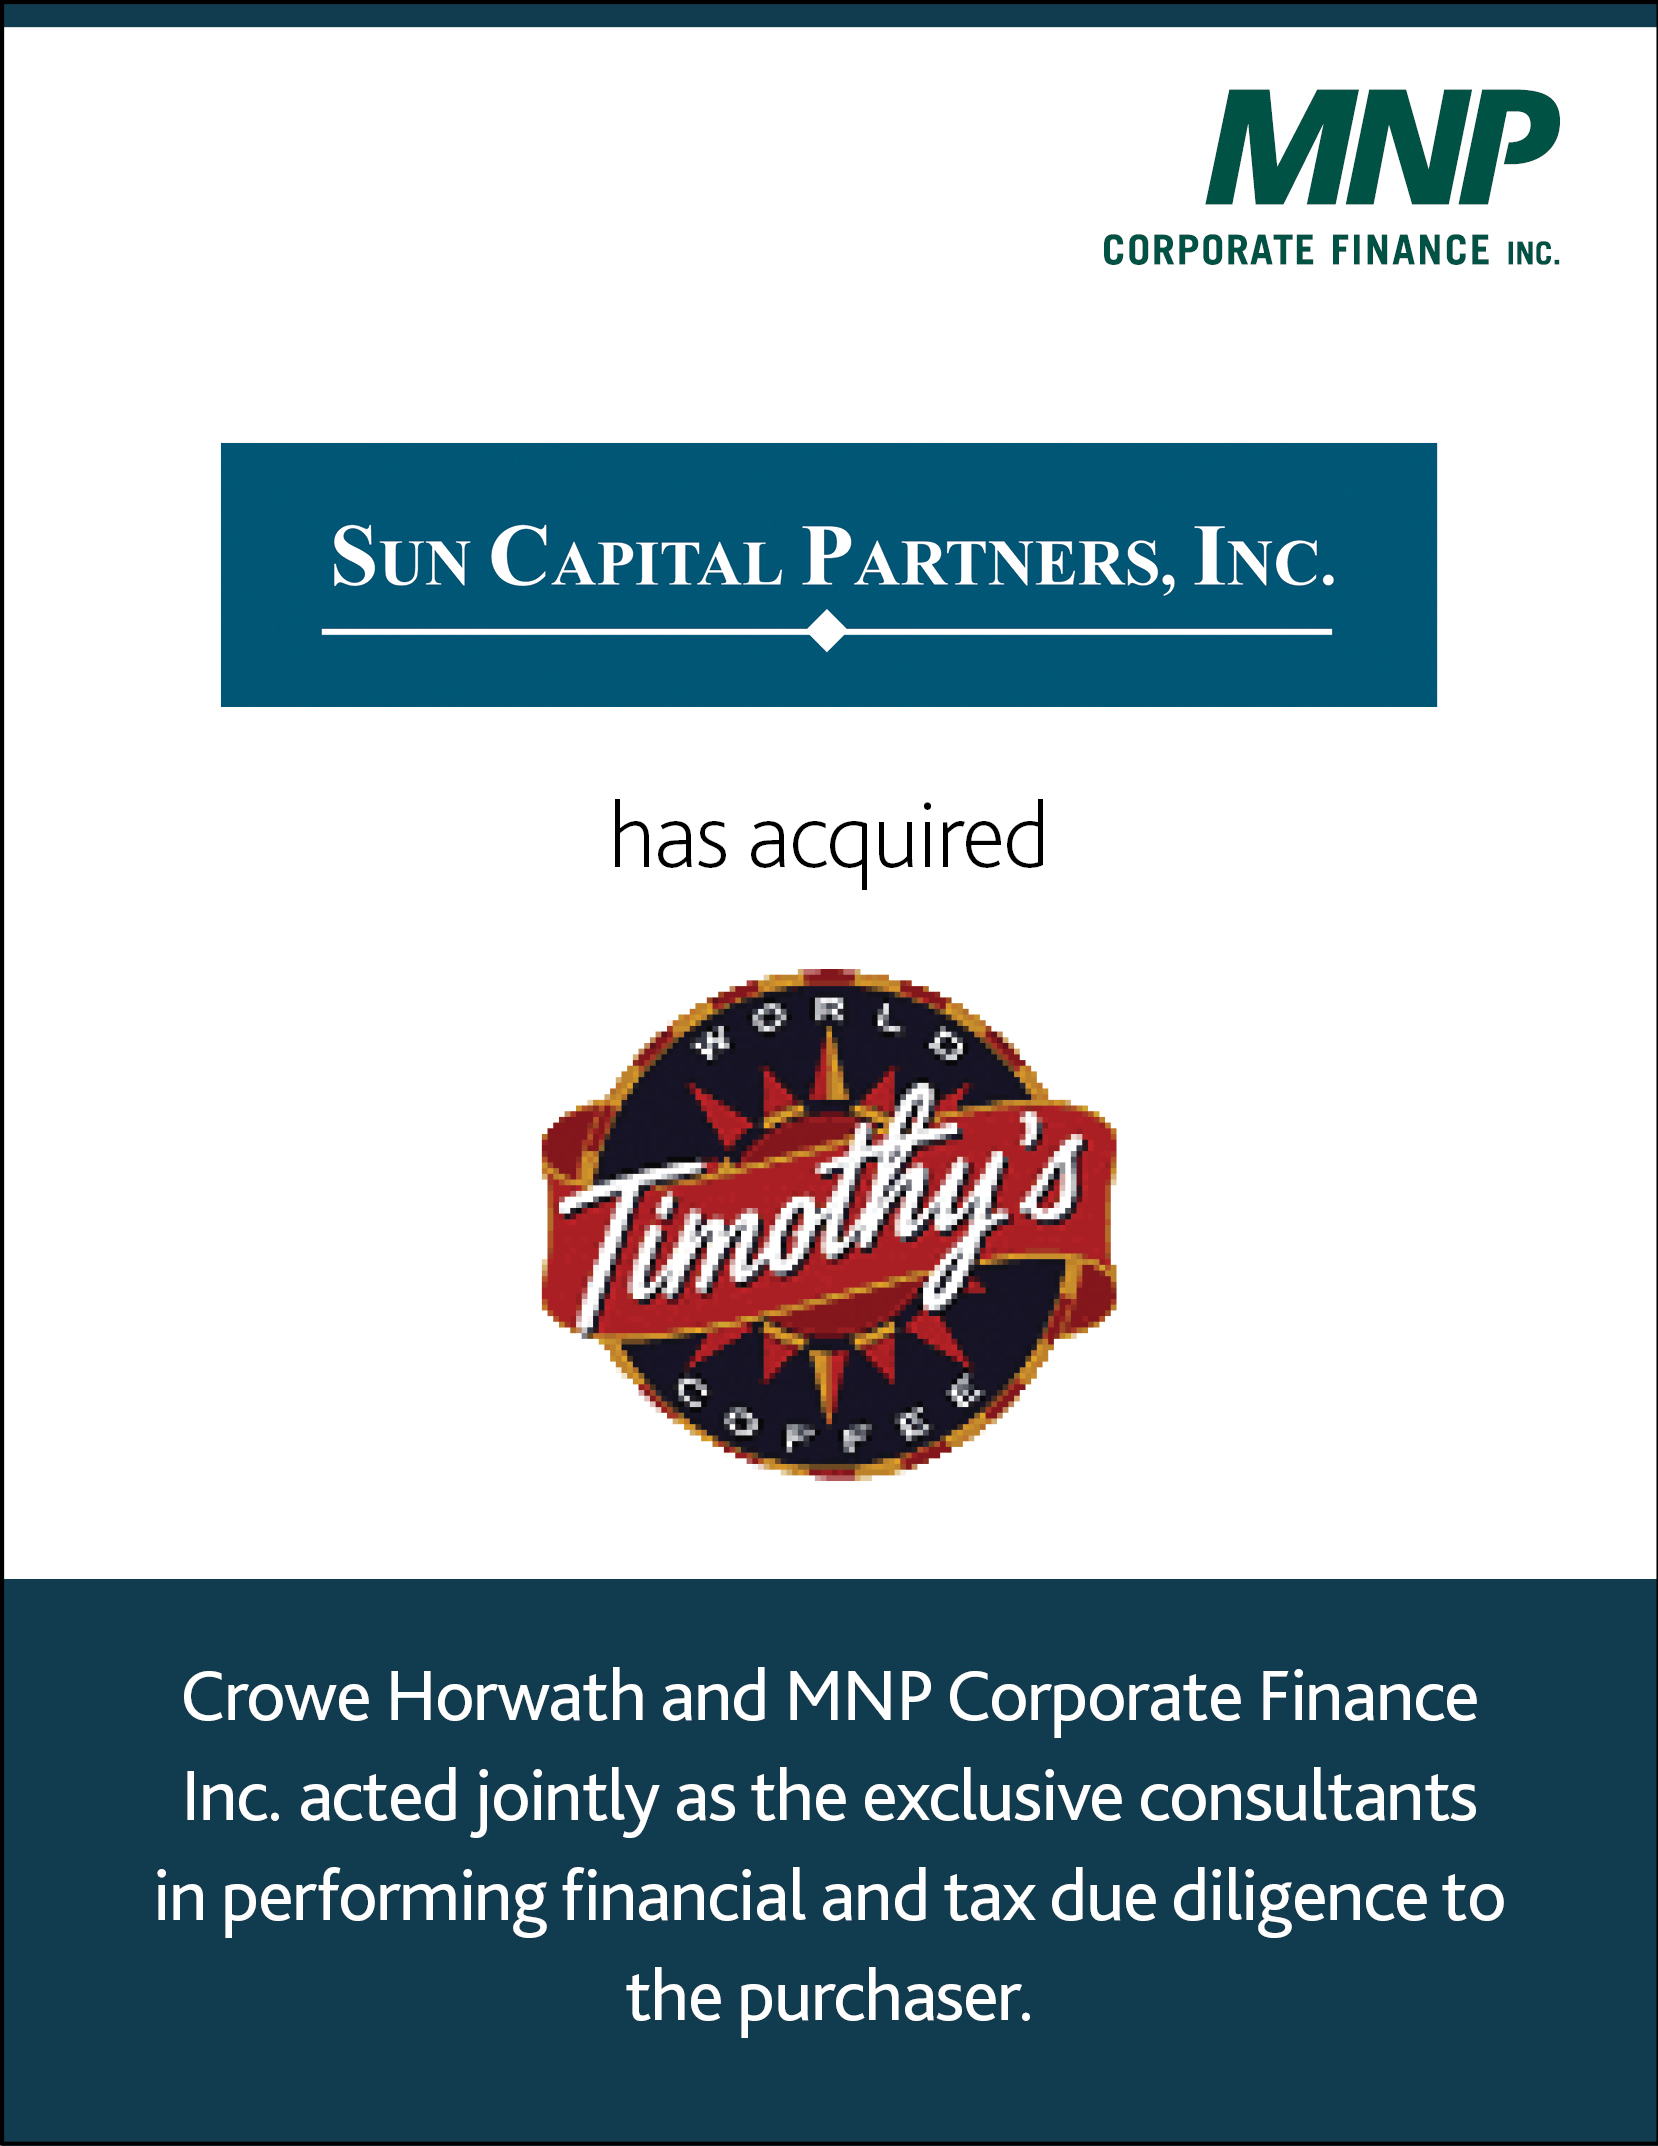 Sun Capital Partners Inc. has acquired Timothy's World Coffee. Crowe Horwath and MNp Corporate Finance Inc. acted jointly as the exclusive consultants in performing financial and tax due diligence to the purchaser